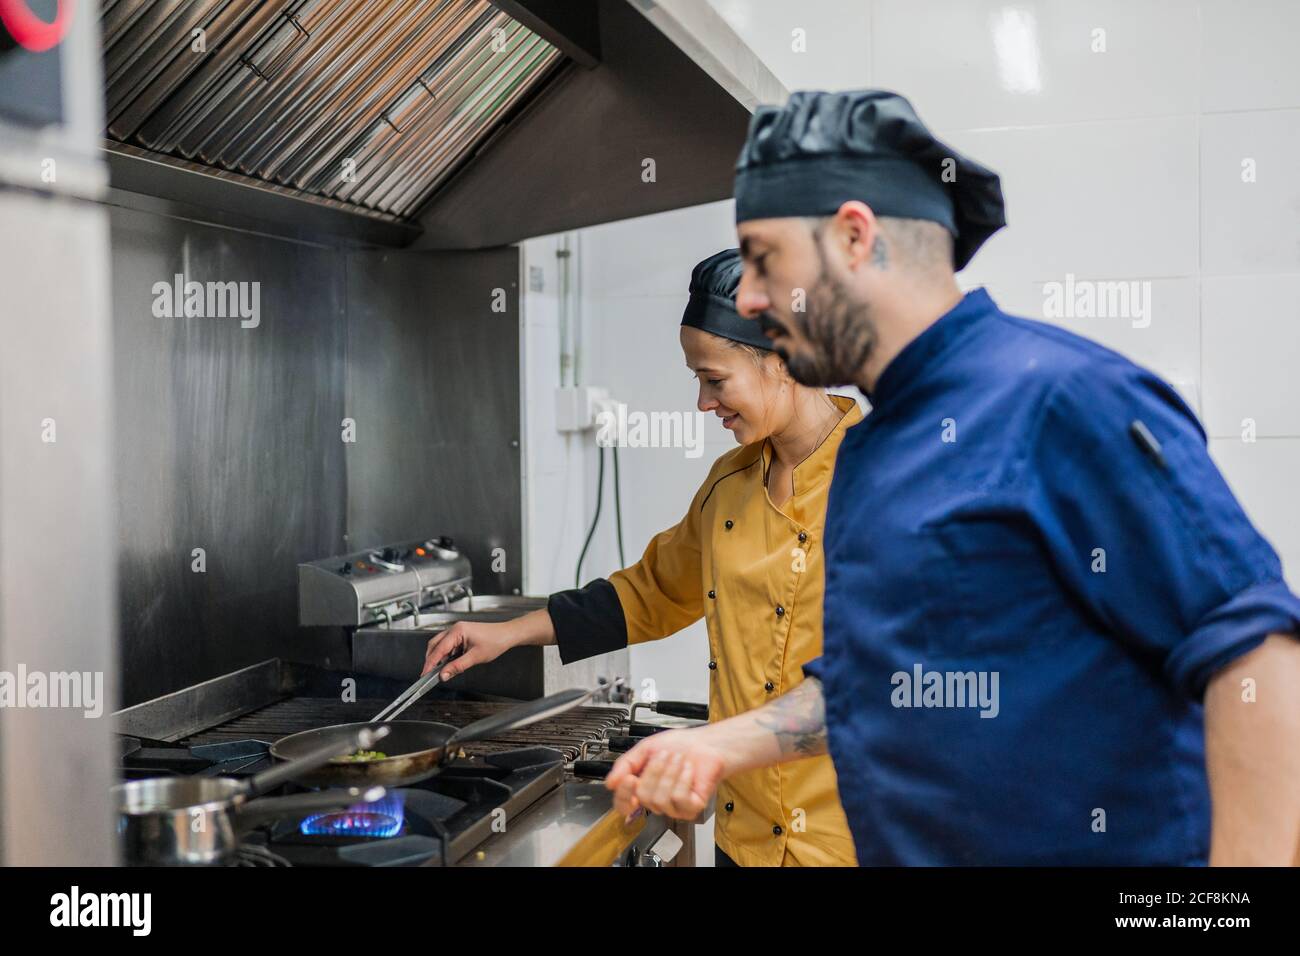 Side view of male chief chef watching young female assistant frying food while working together in professional kitchen Stock Photo